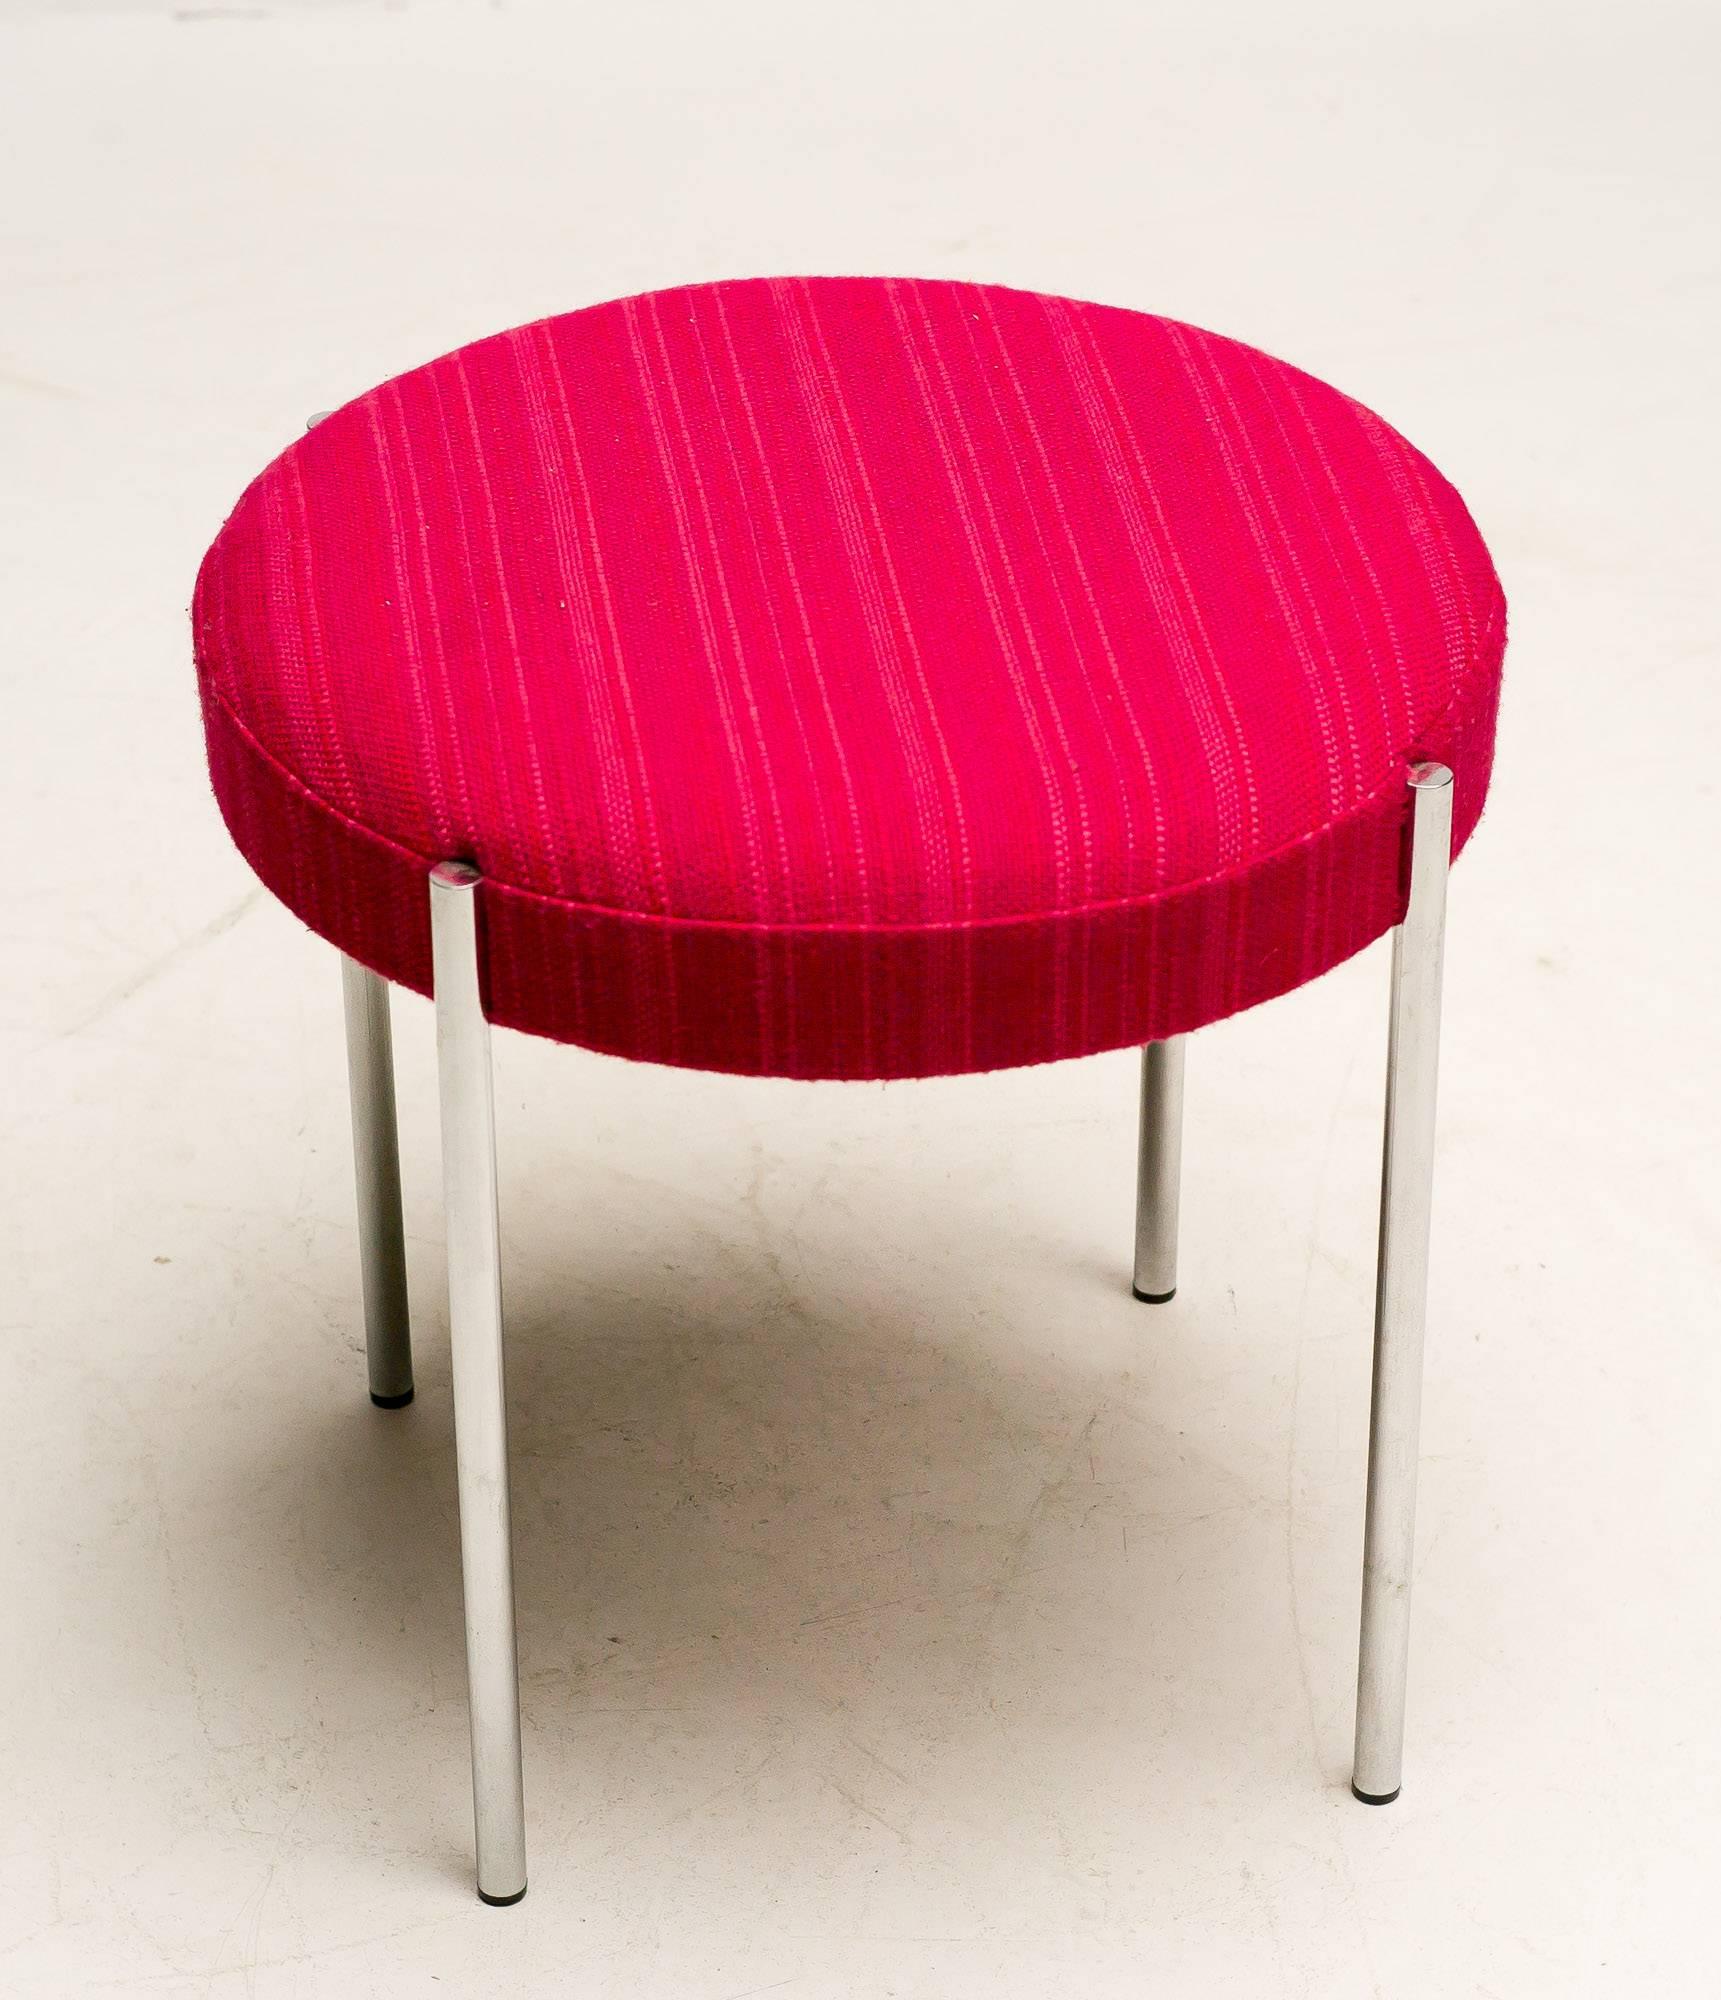 A rare model no. 430 stool designed by Verner Panton, 1967, for Thonet/Germany.
Tubular steel frame, plywood, upholstered with beautiful red wool, with Thonet plaque. 
Produced only for a very short period.